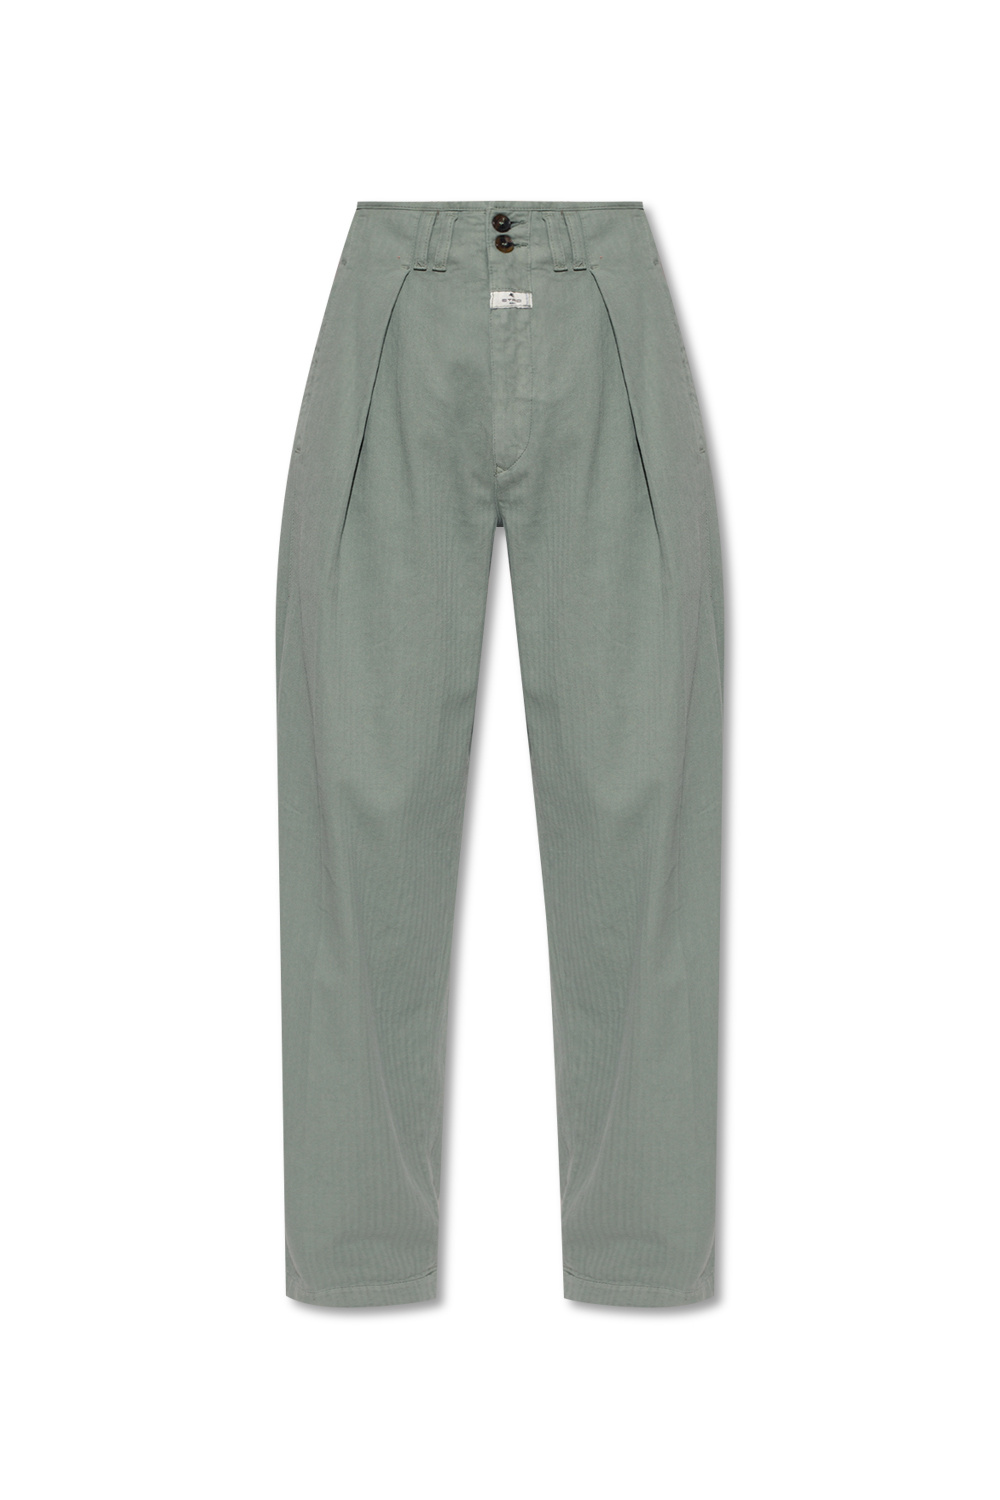 Etro Loose-fitting trousers